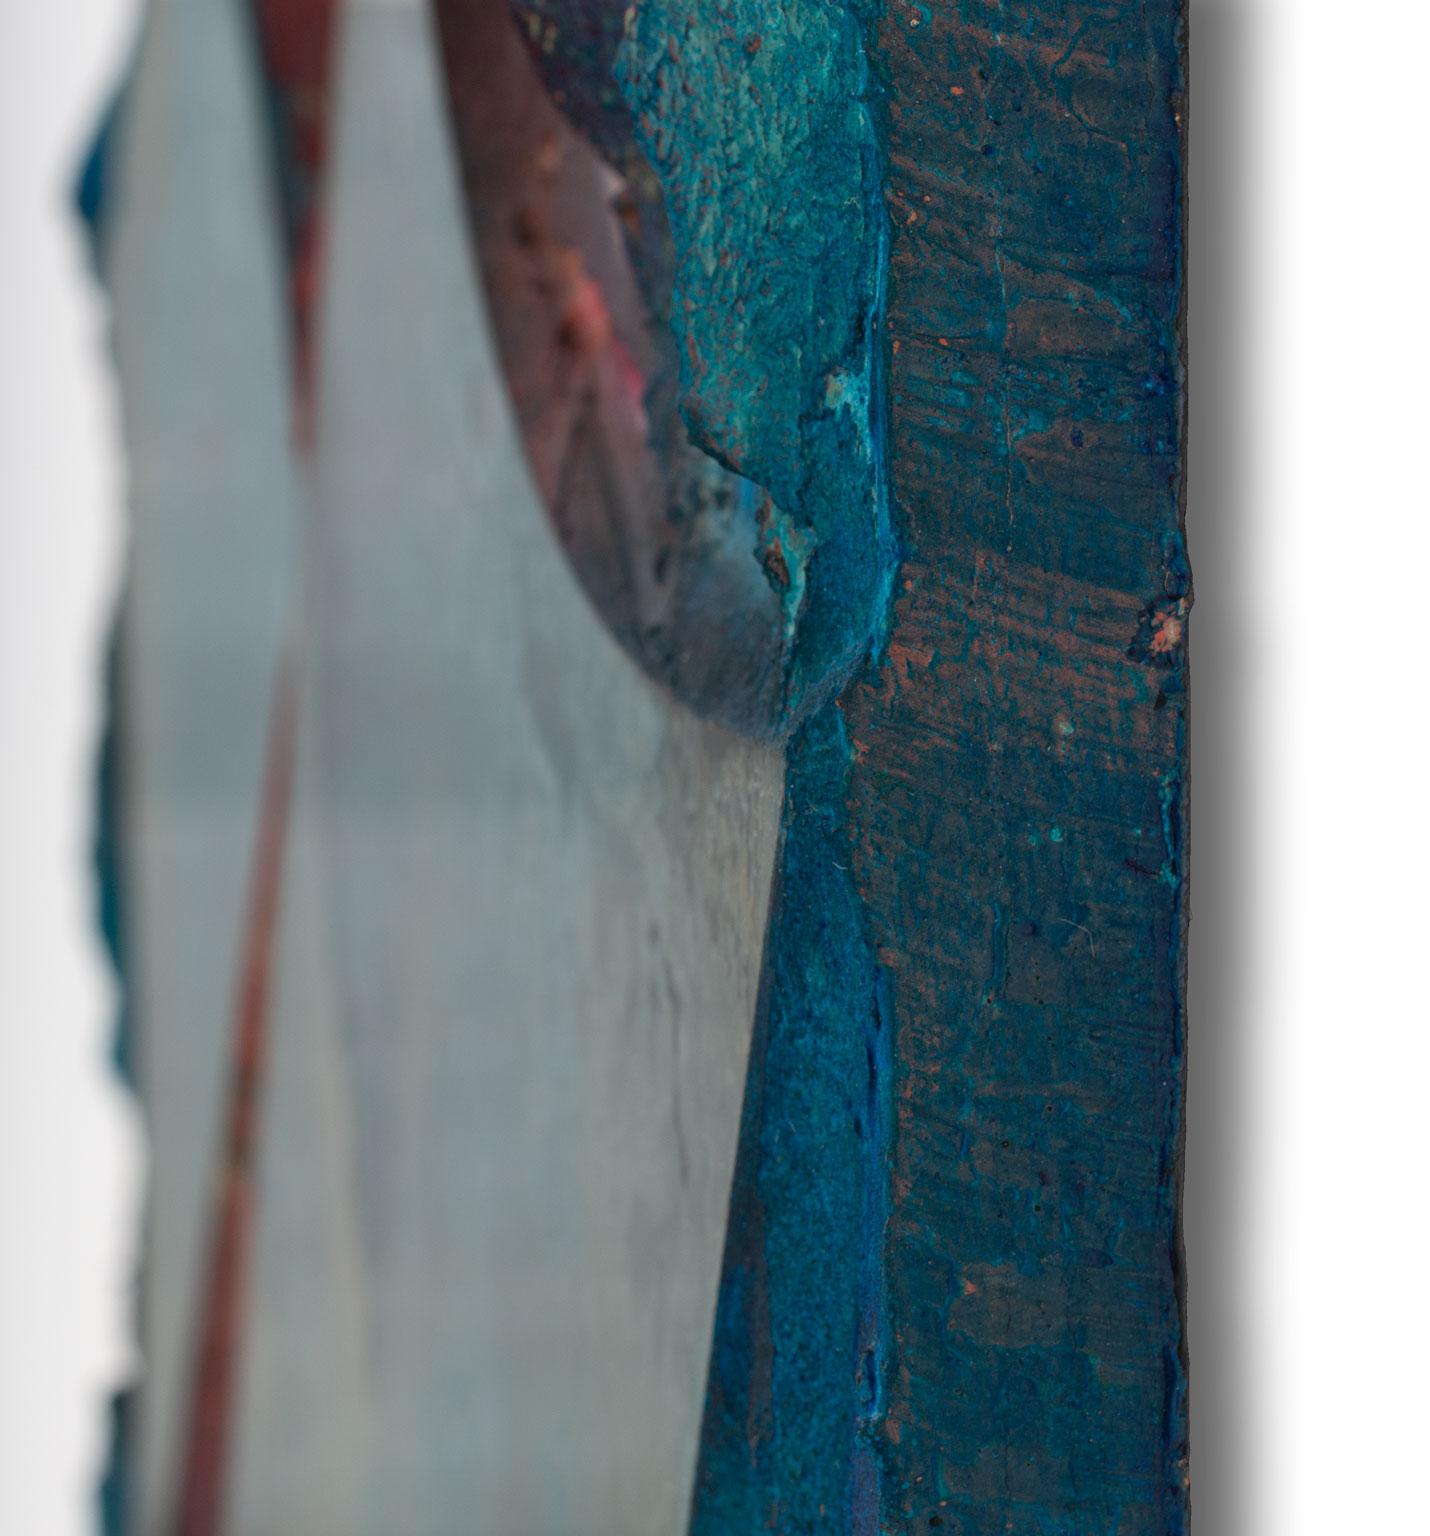 Tempered Glass, Cement Poly, Minerals, Oxides Wall Sculpture by Laddie John Dill 9